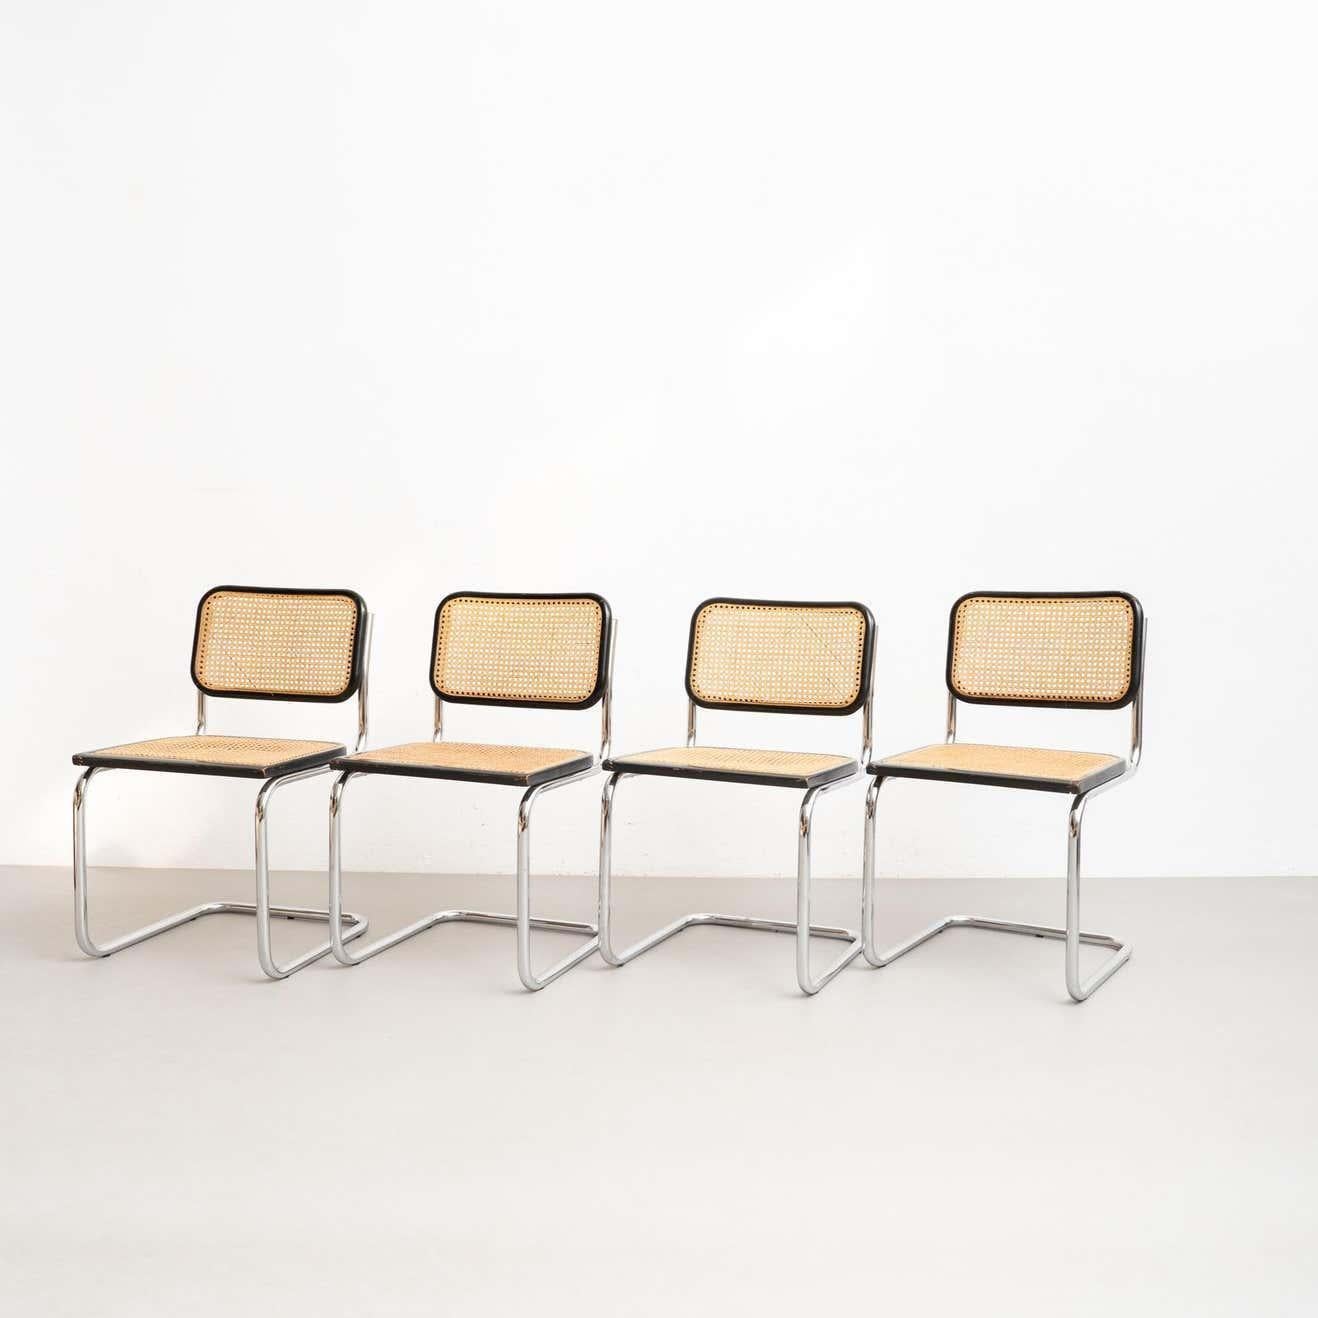 Italian Set of 4 Marcel Breuer Cesca Metal and Wood Mid-Century Modern Chairs, c 1960 For Sale